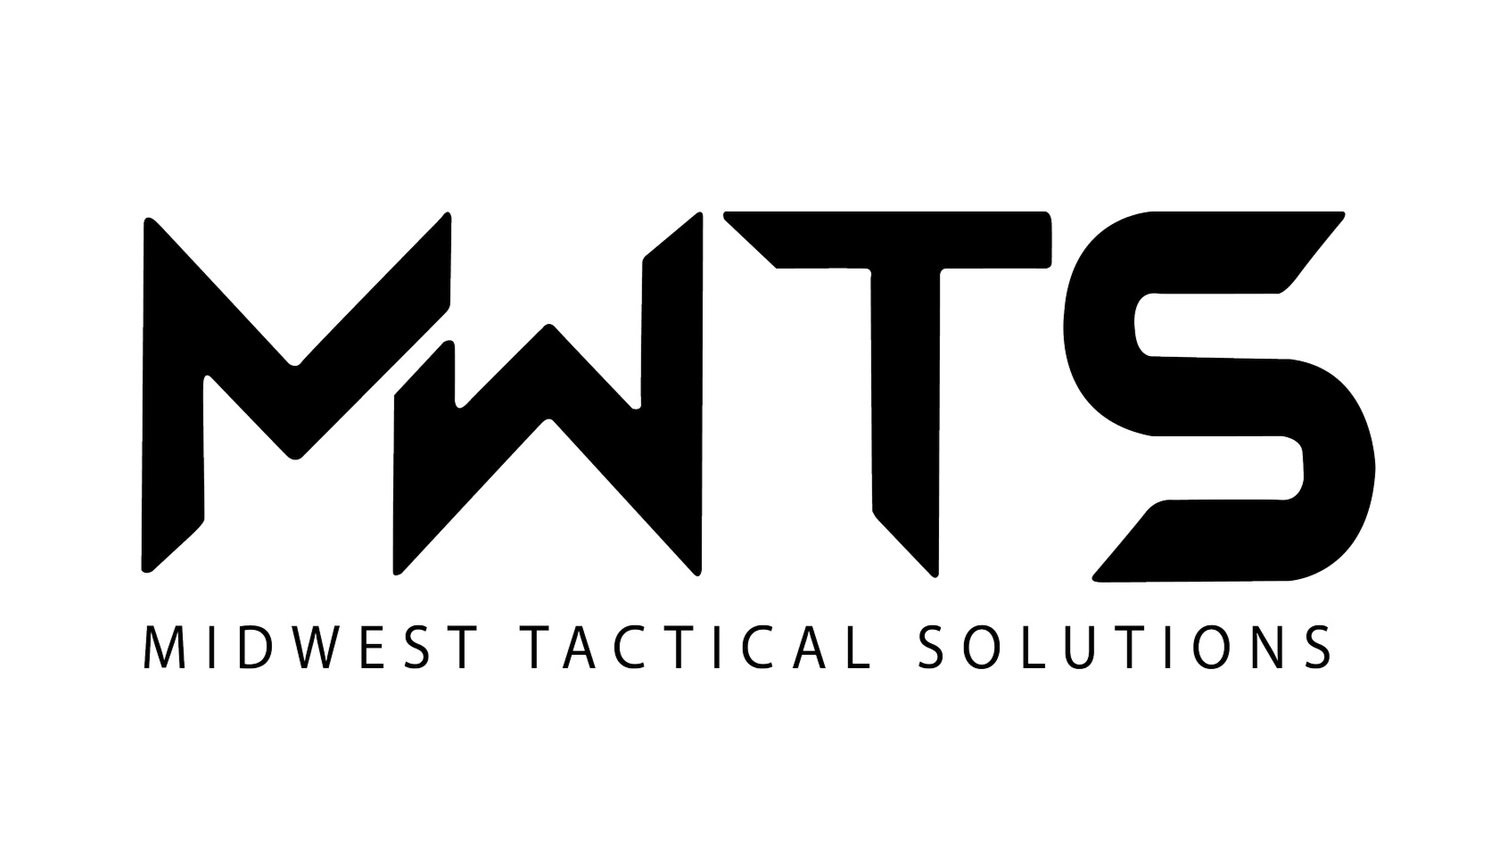 MidWest Tactical Solutions